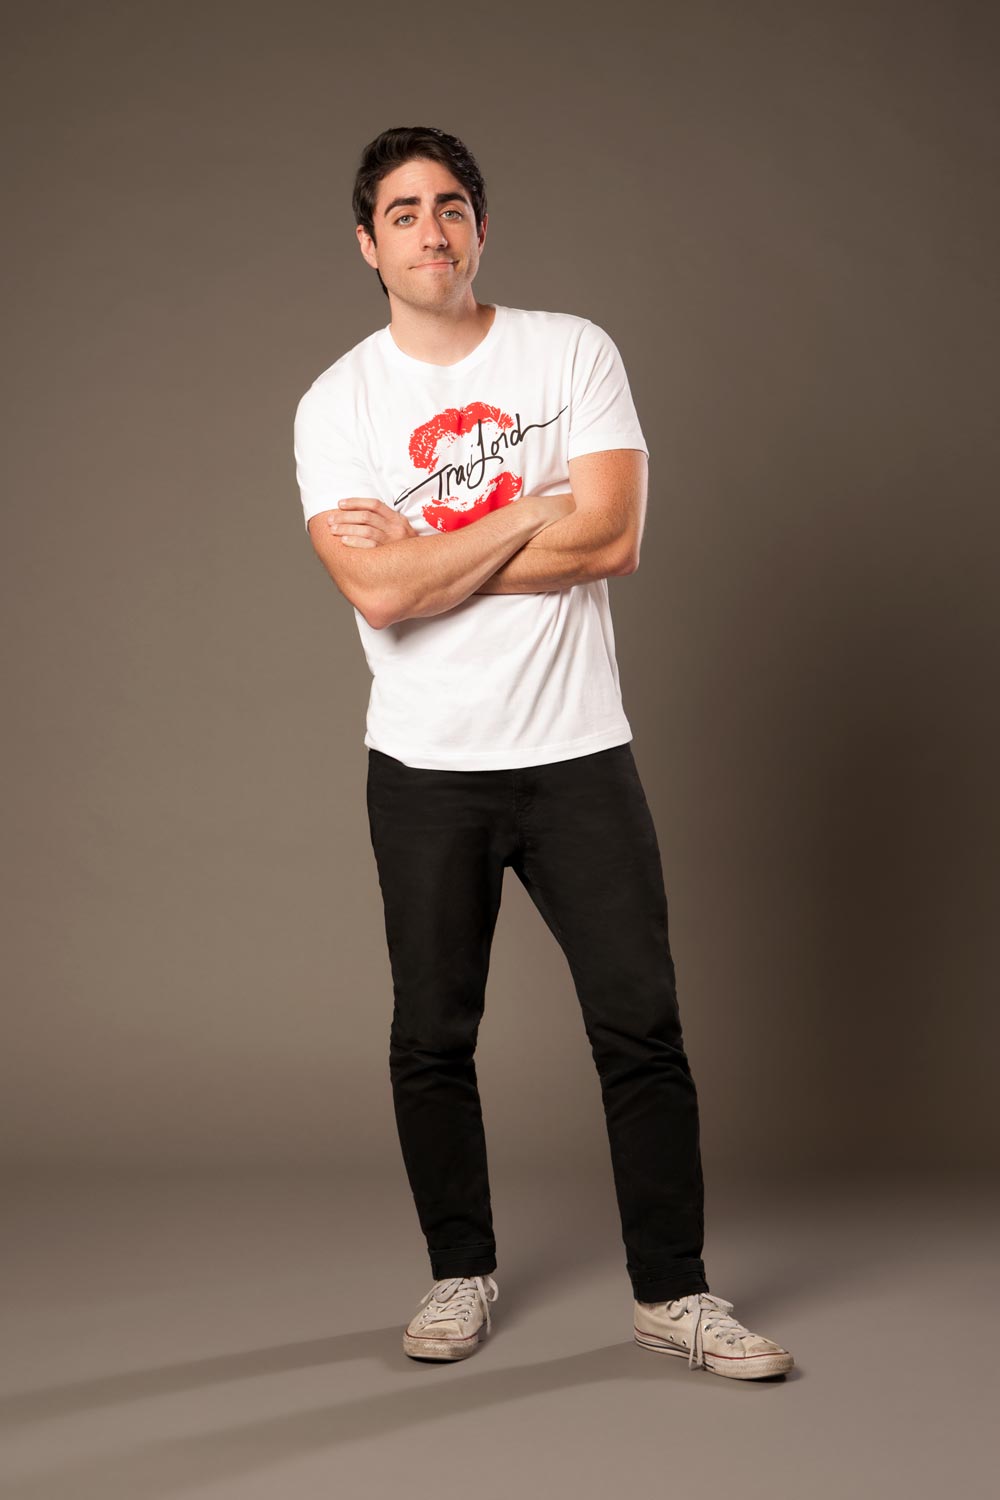 Final Sale - Men's Signature T-shirt in White by Traci Lords